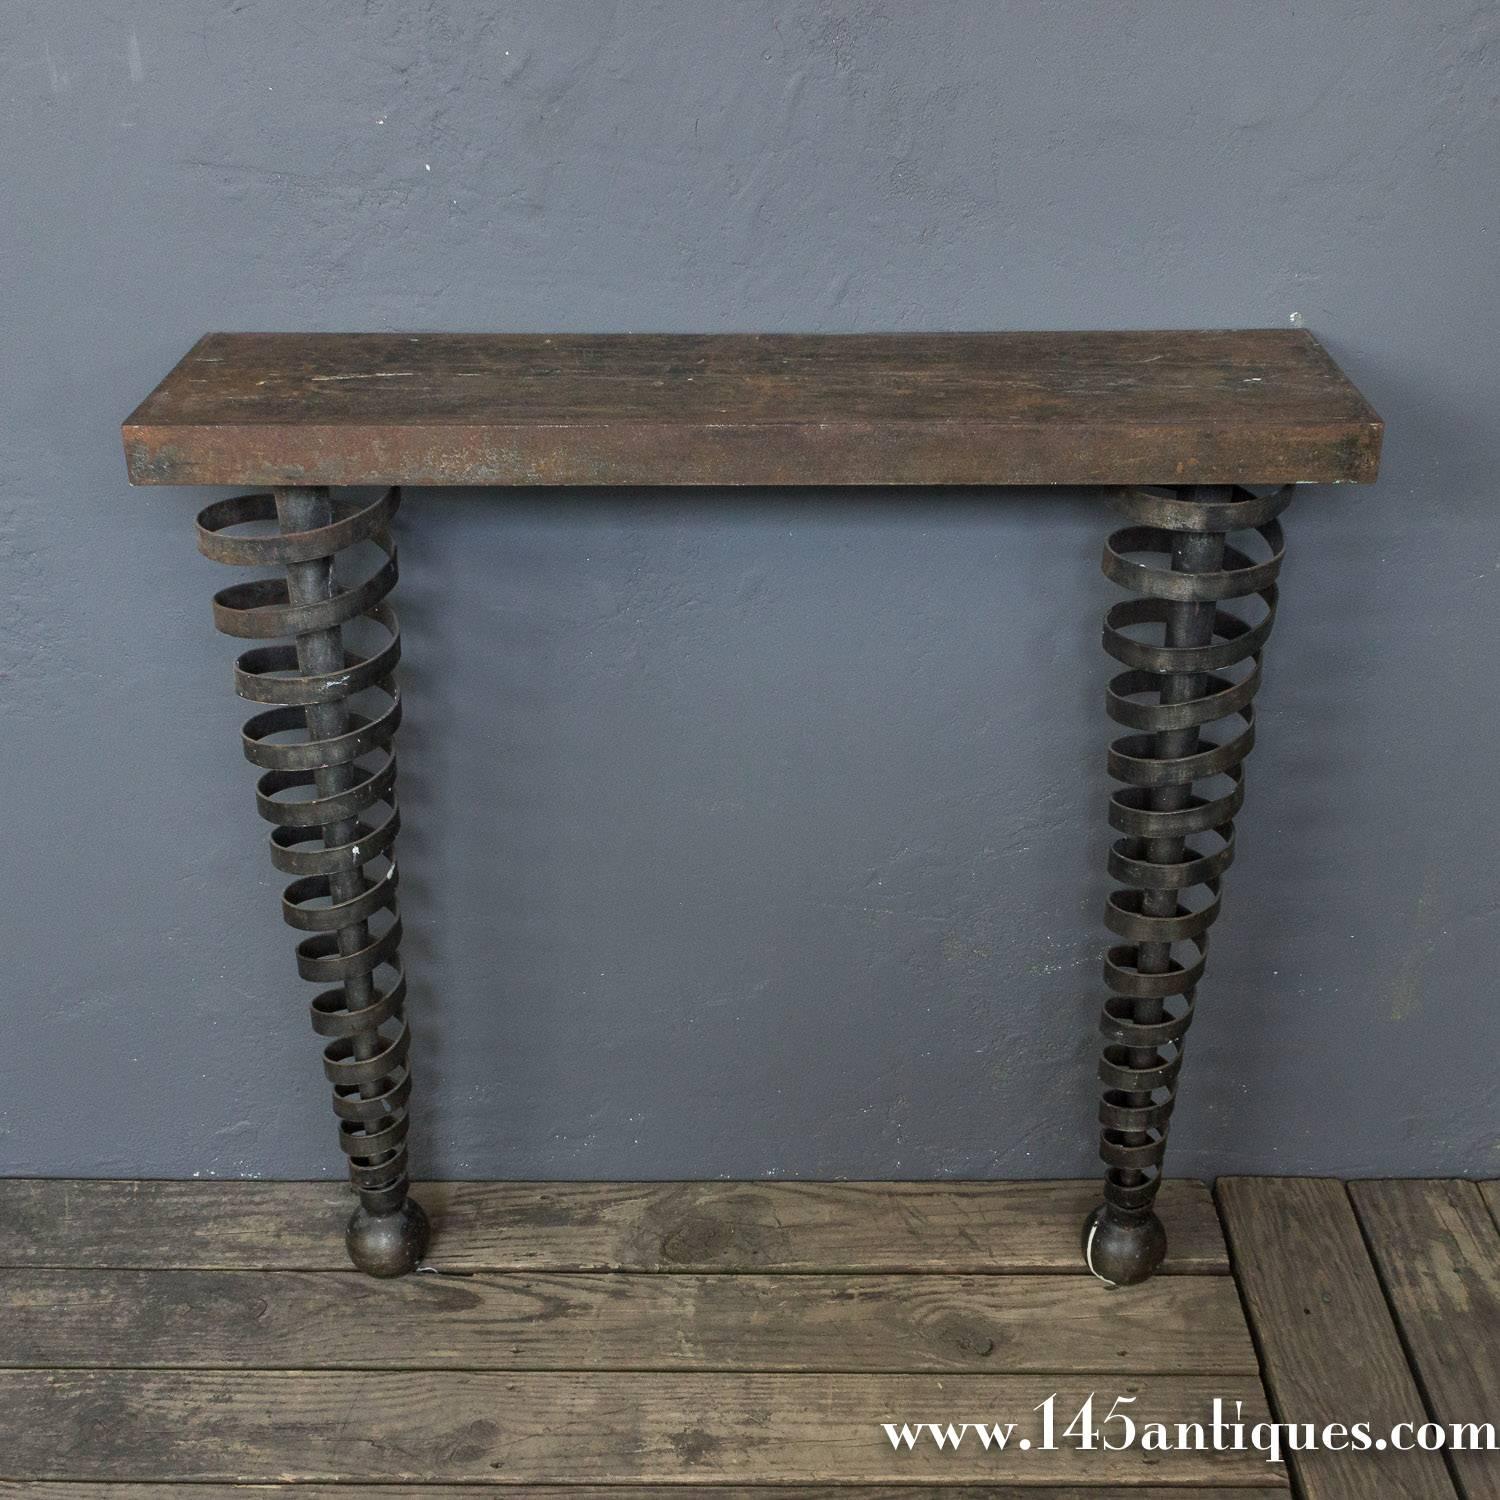 American 1990s wrought iron console with swirling iron banding and ball feet. Maybe designed to have a stone top. Sold as is.